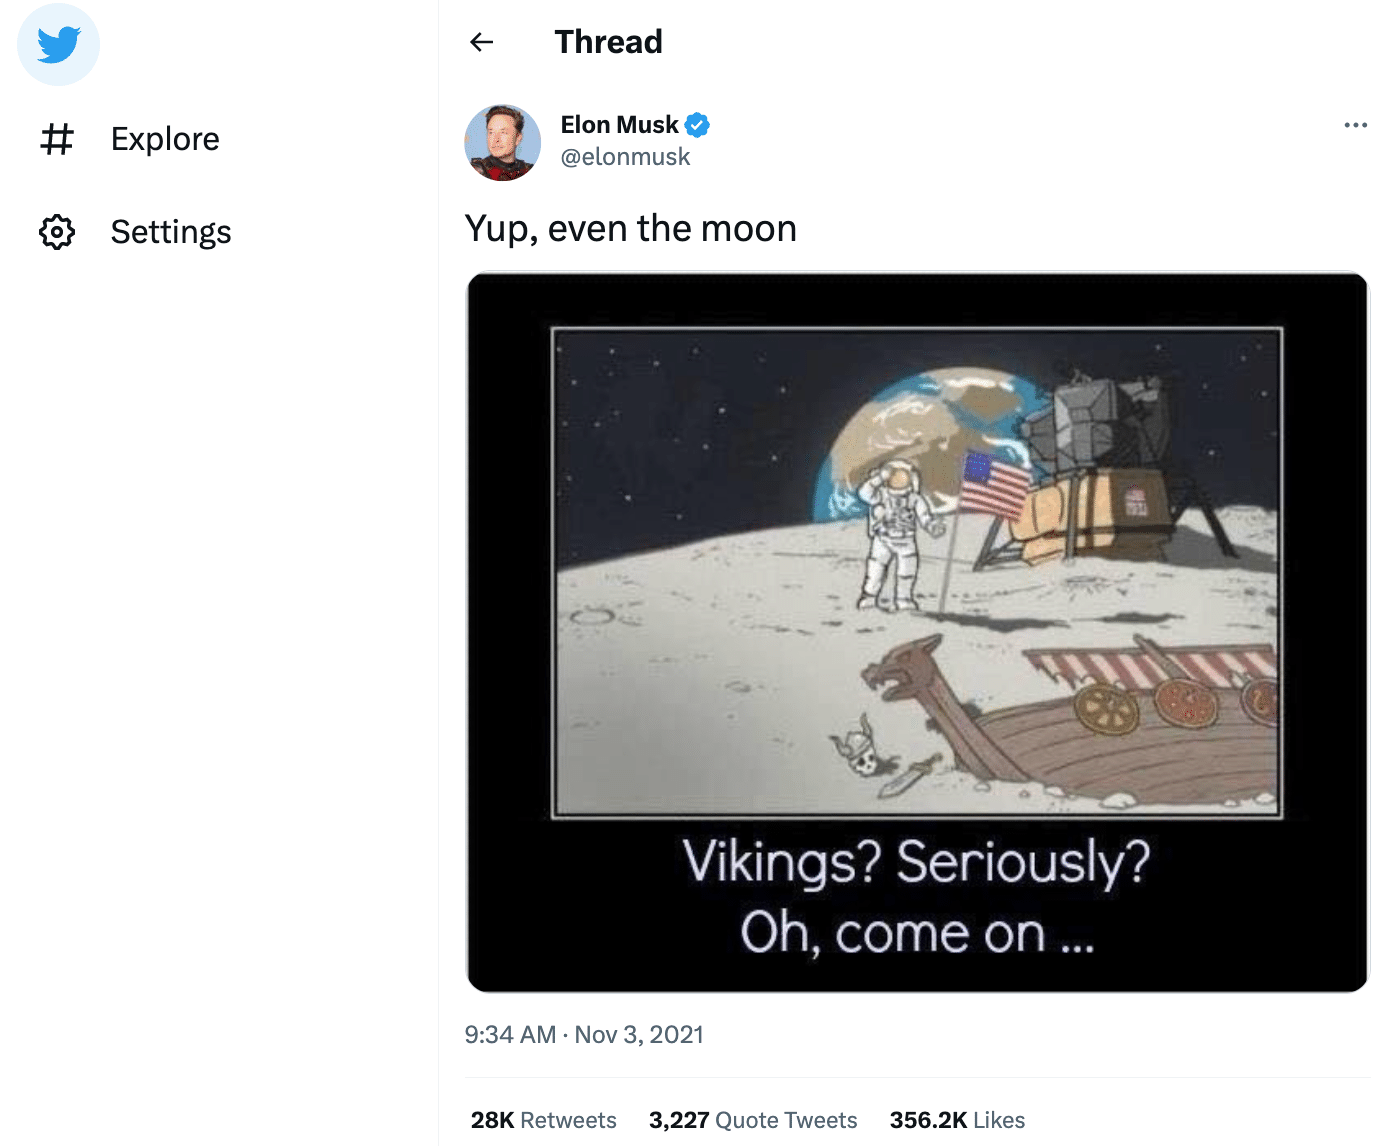 Elon Musk’s tweet about Vikings and the Moon caused rapid rises and falls of several unknown crypto projects.